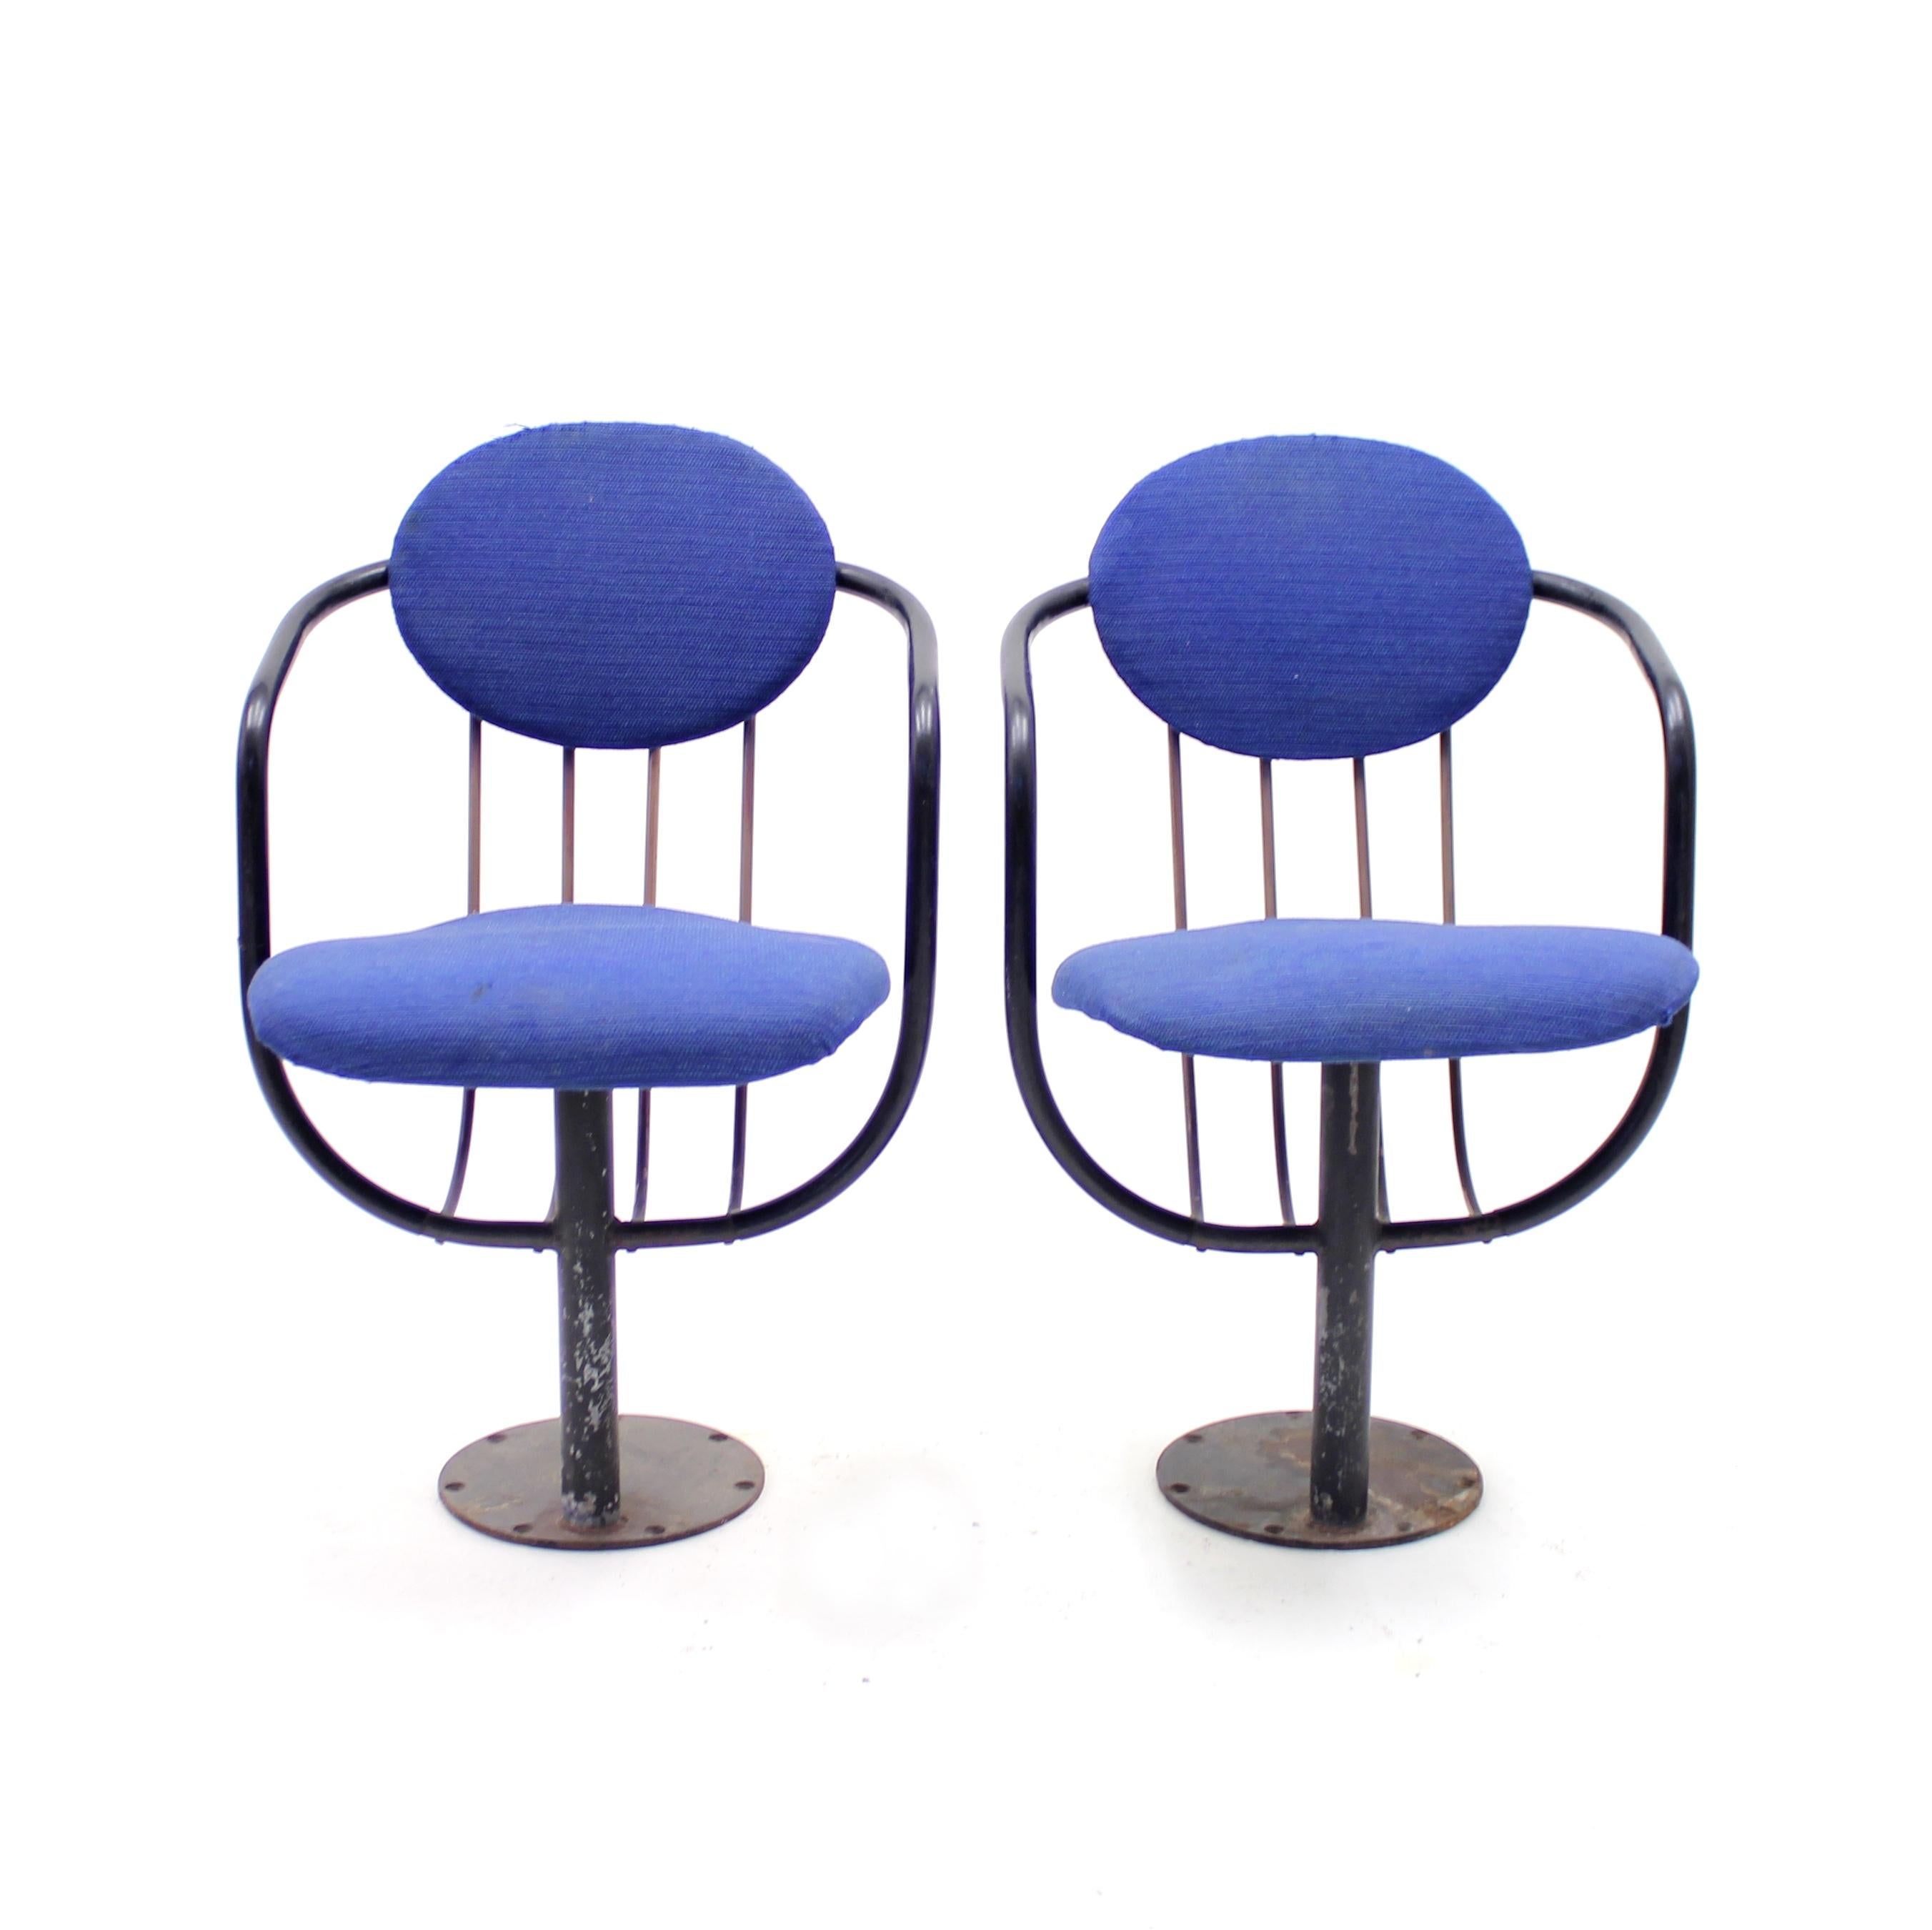 Scandinavian Modern Poul Henningsen, Pair of Foldable Theatre Chairs for the Betty Nansen Theatre, 1 For Sale